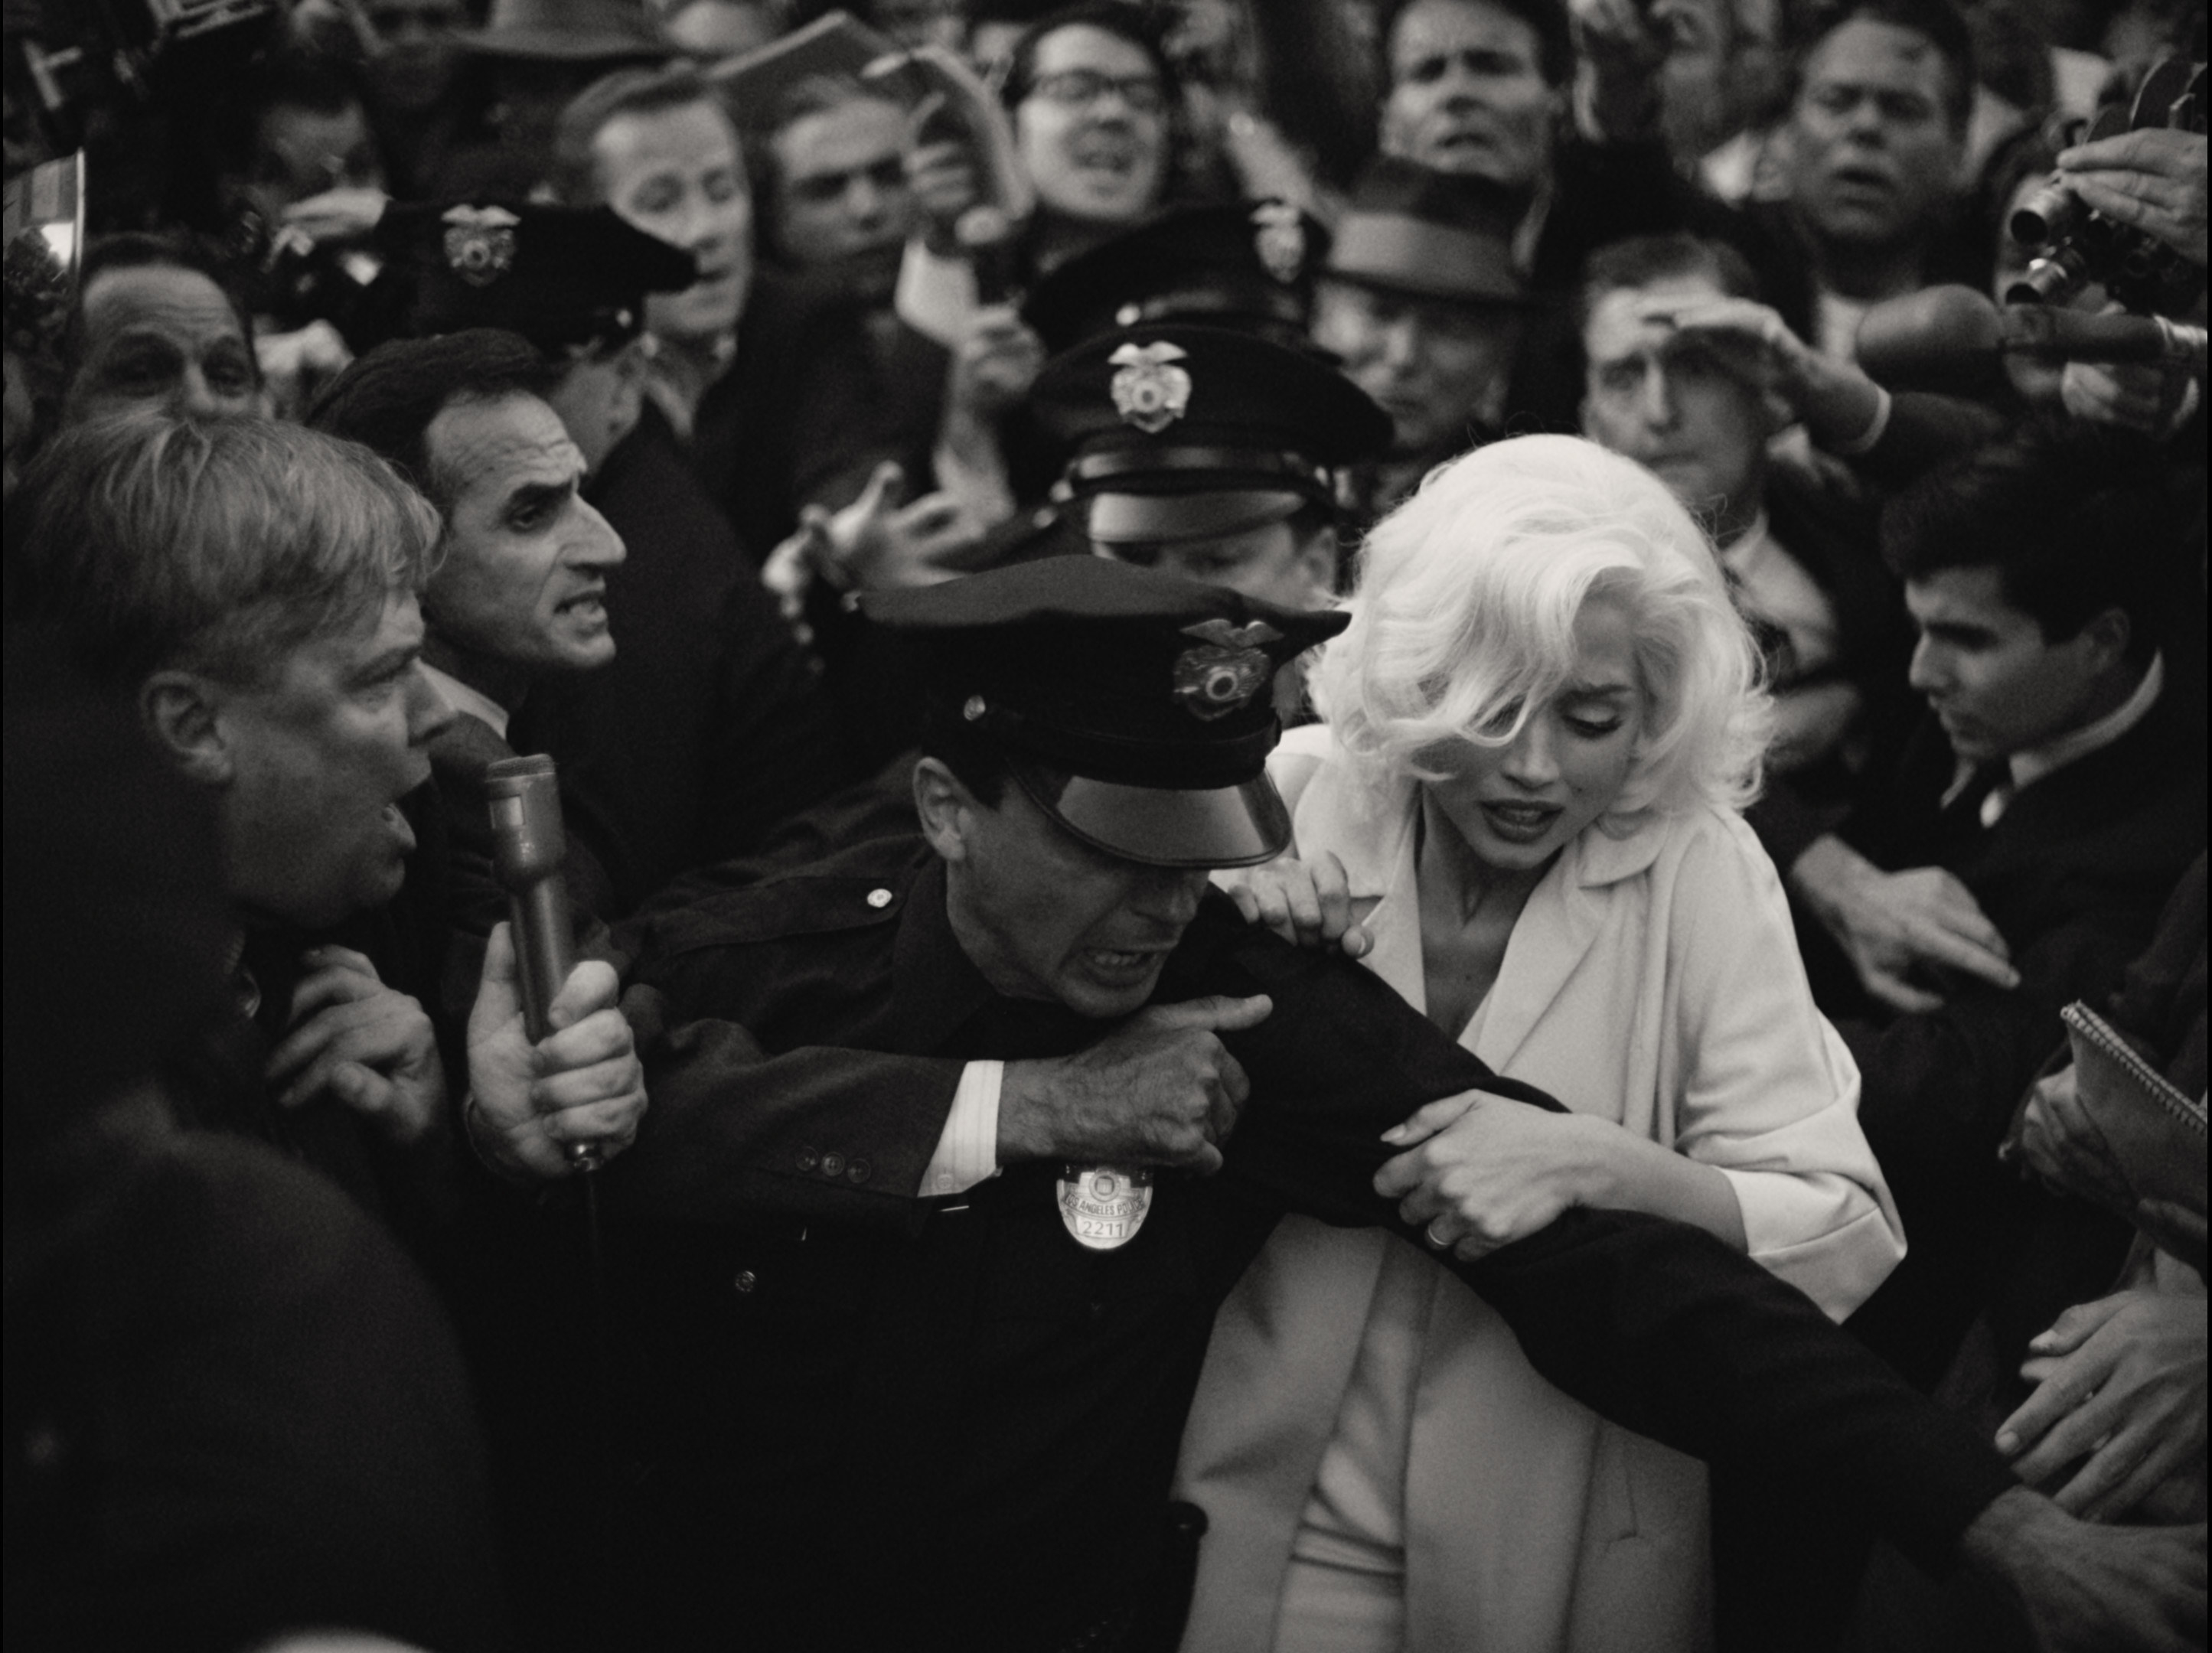 Ana de Armas as Marilyn Monroe being ushered through a crowd by a police escort